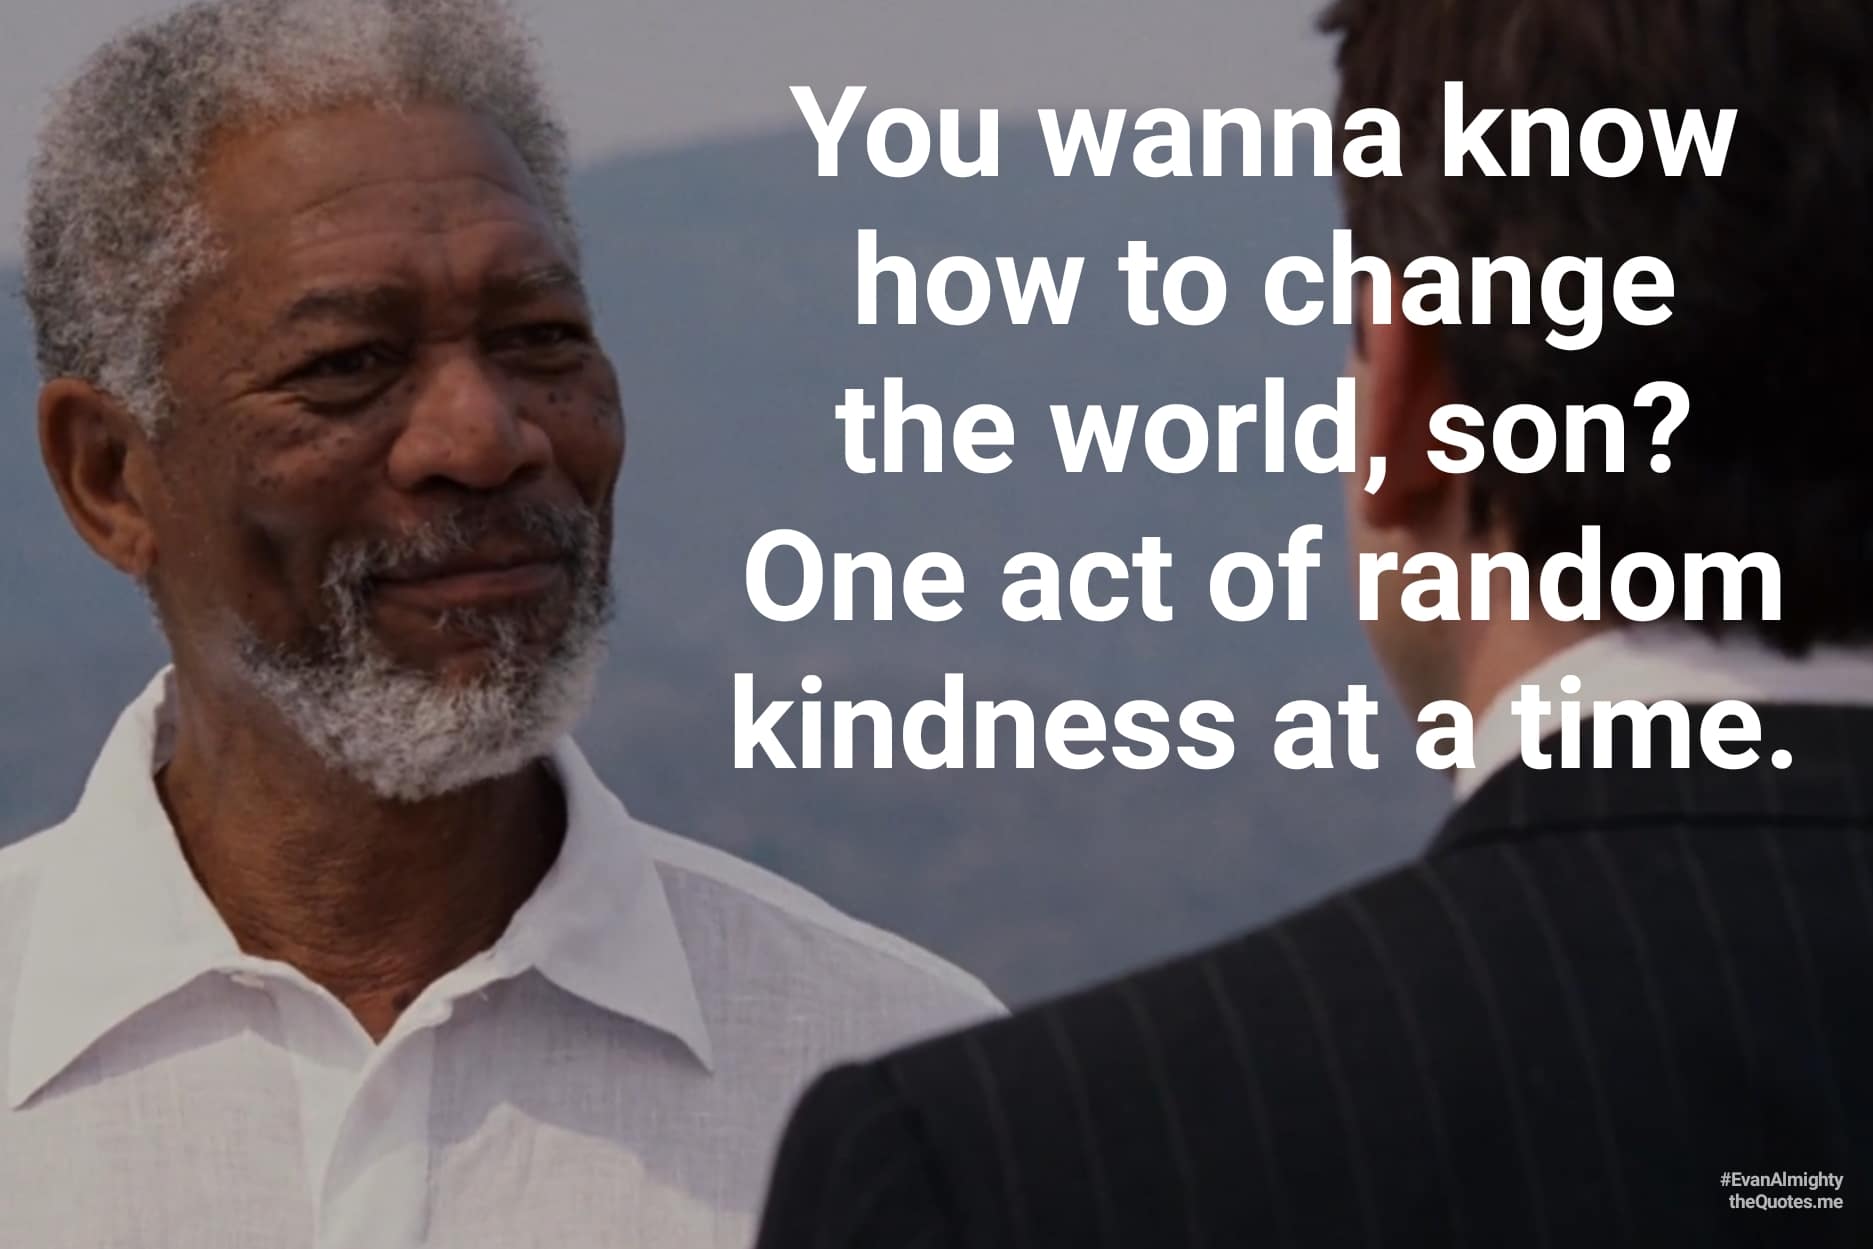 How to change the world